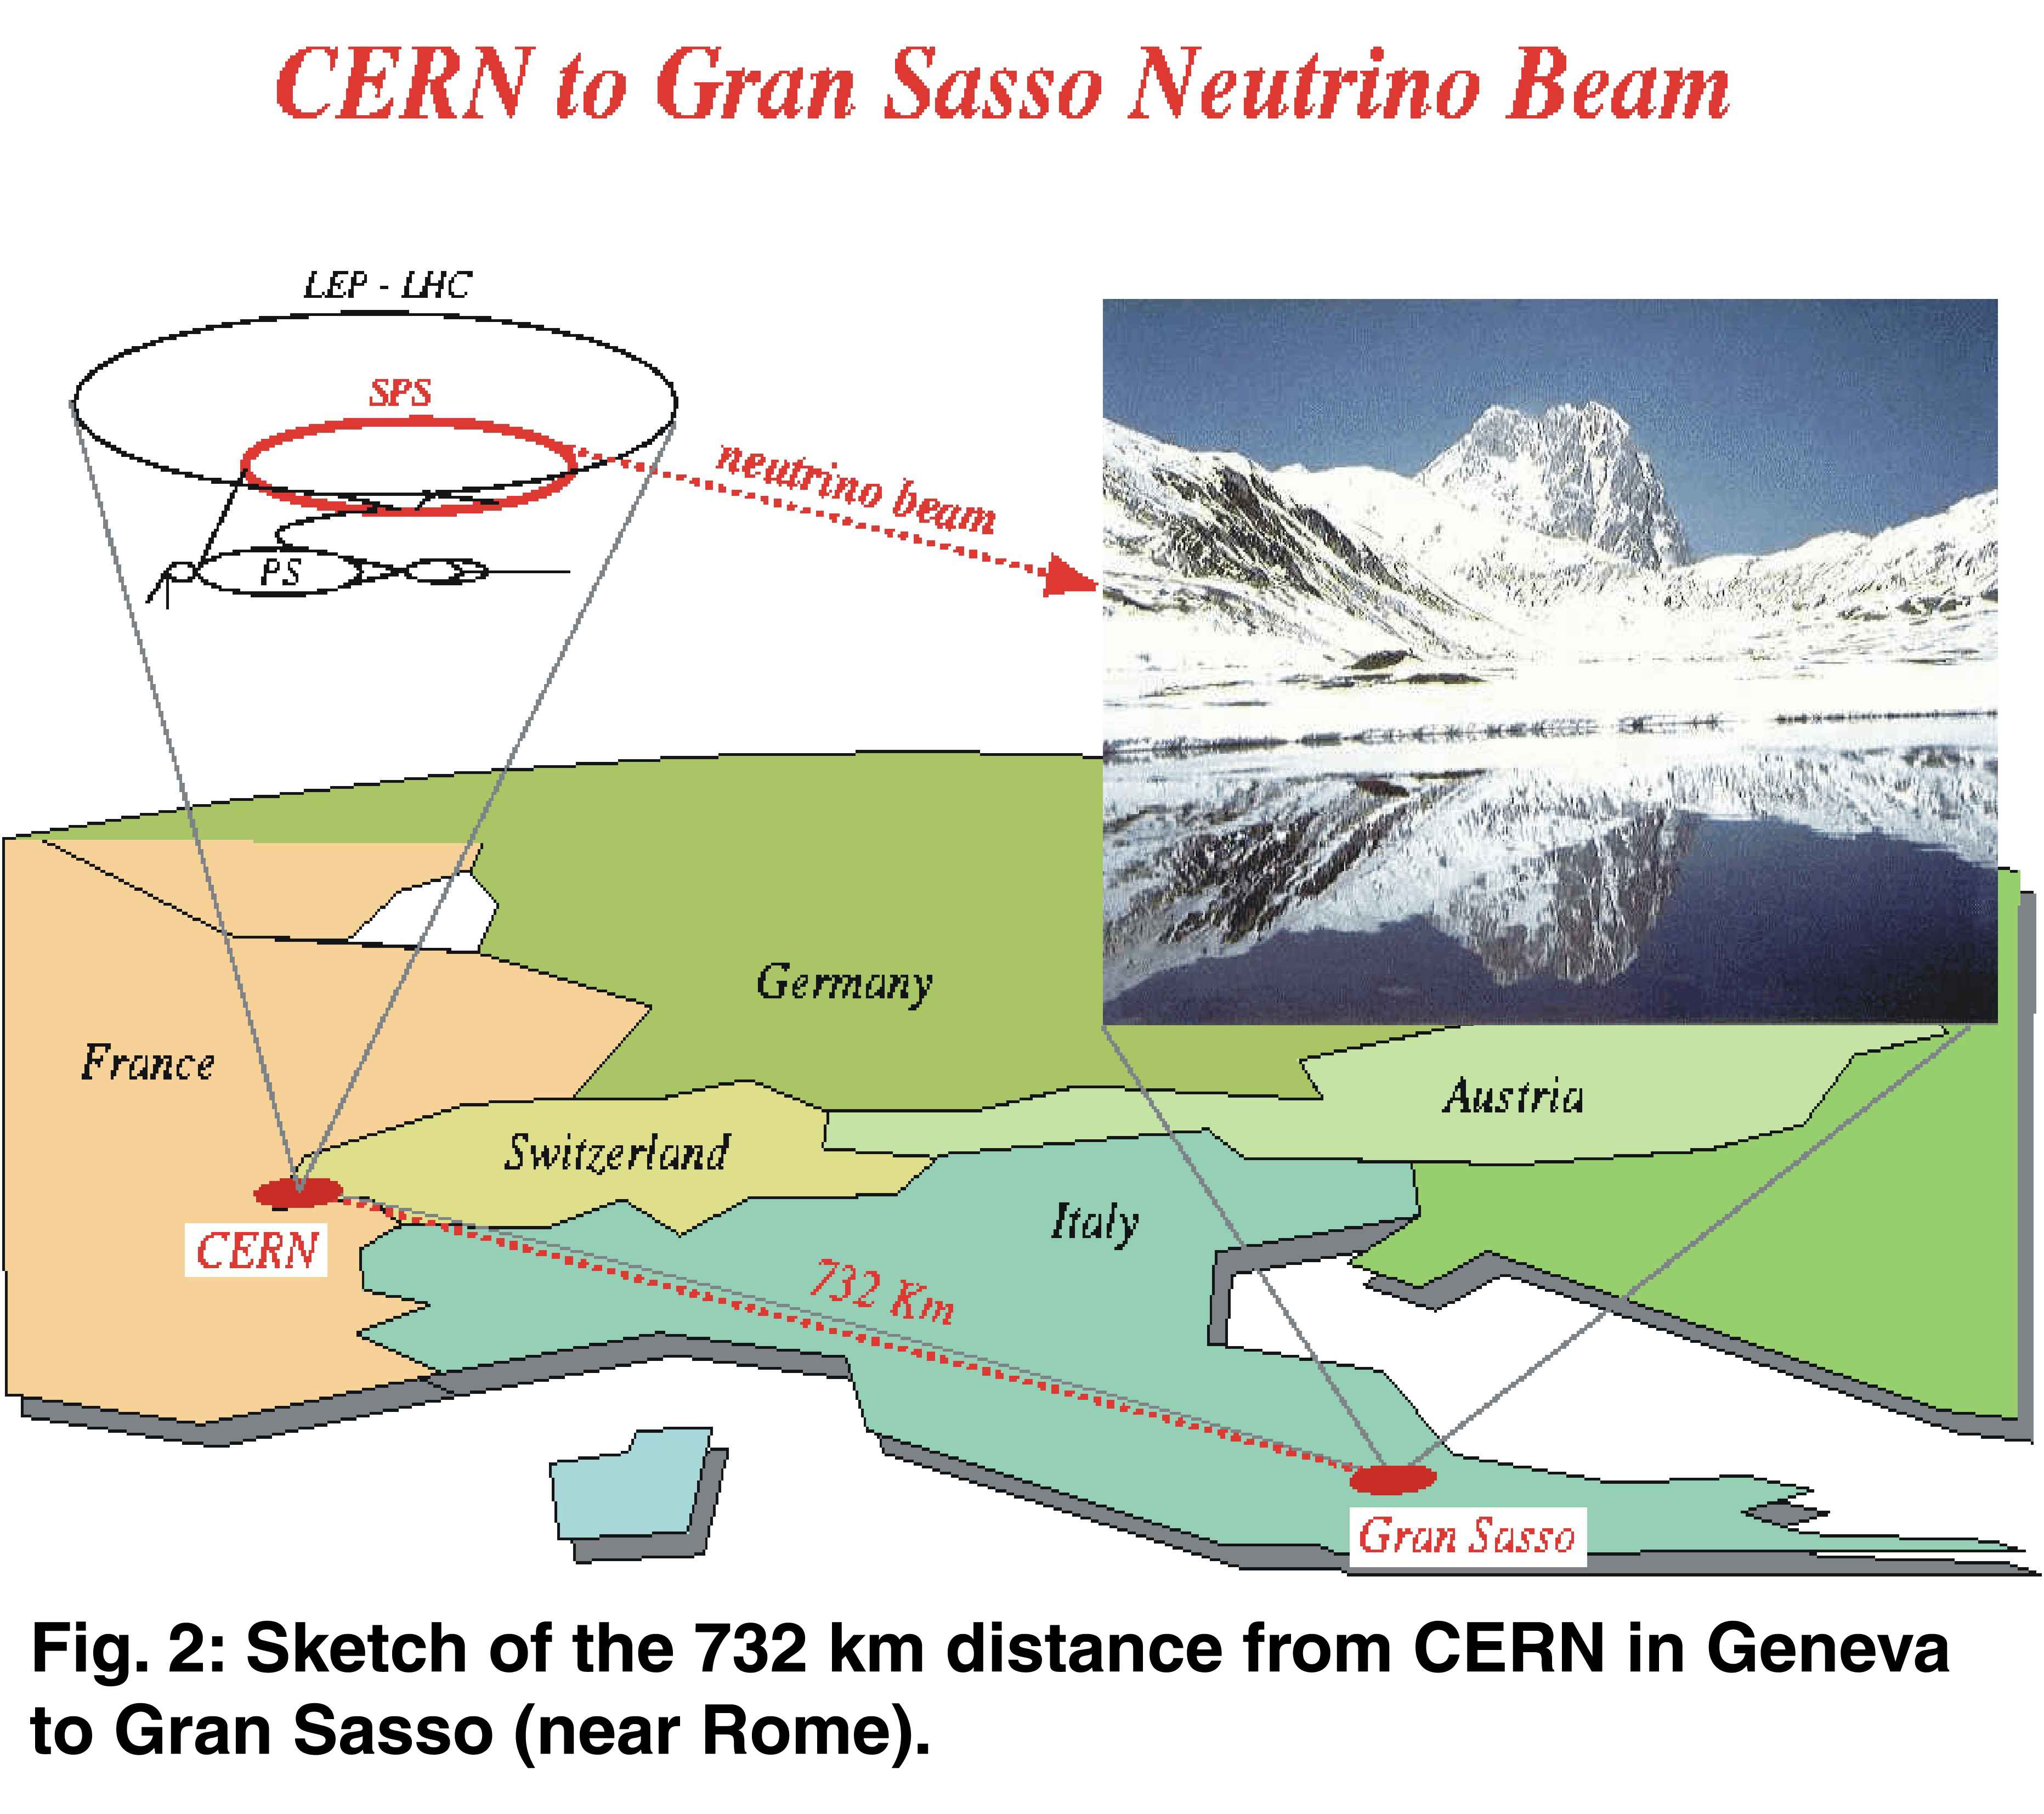 Sketch of the 732 km distance from CERN in Geneva to Gran Sasso (near Rome).